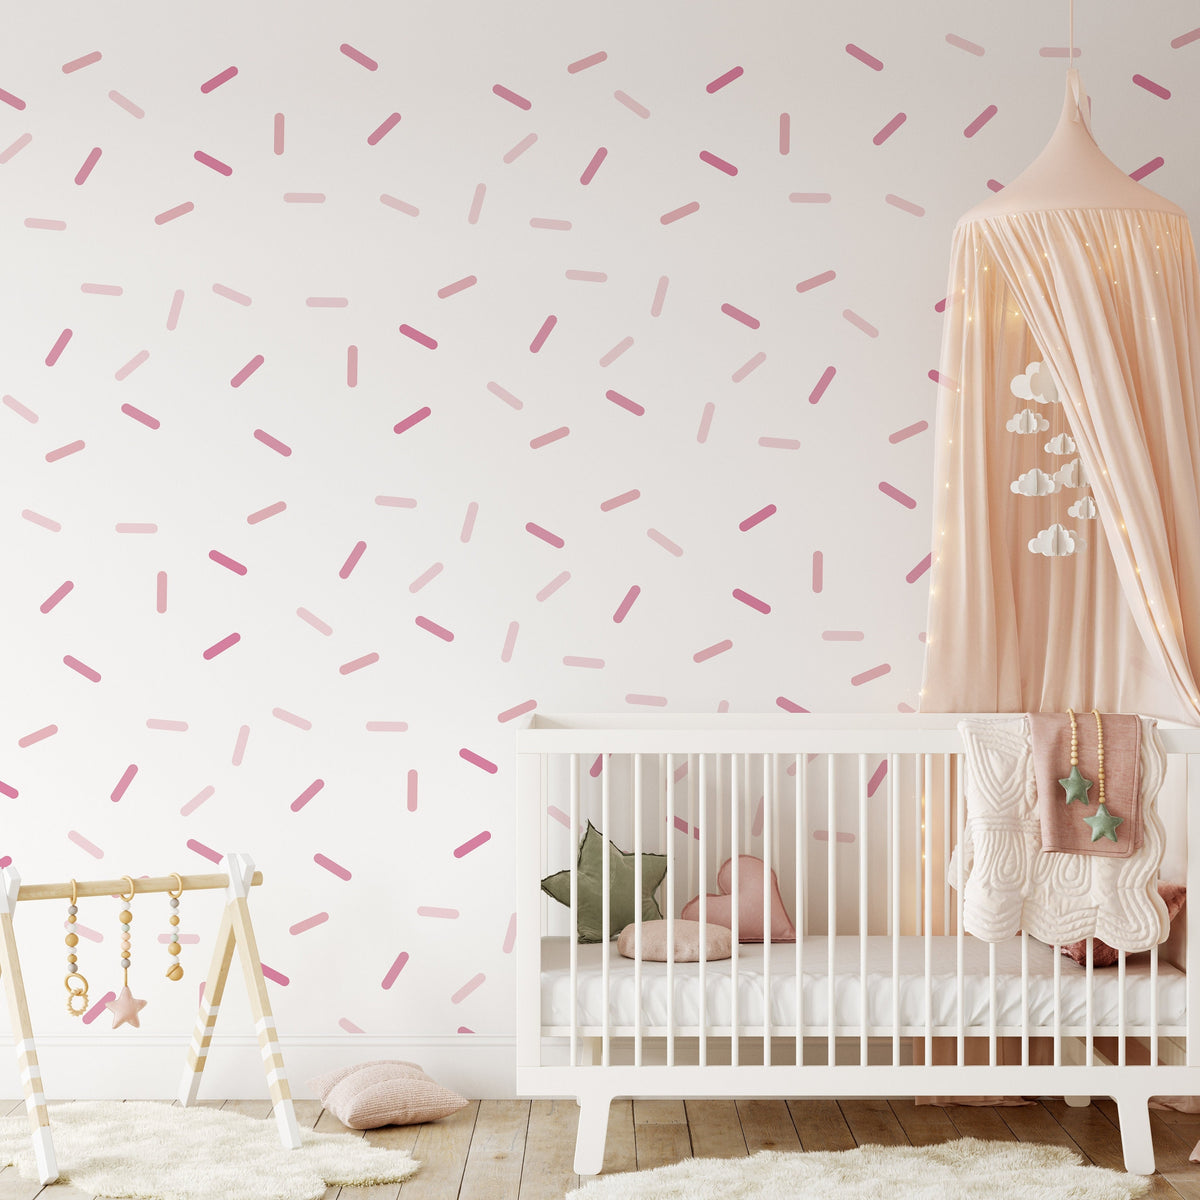 Pink Sprinkle Wall Decal Stickers Confetti Wall Decor